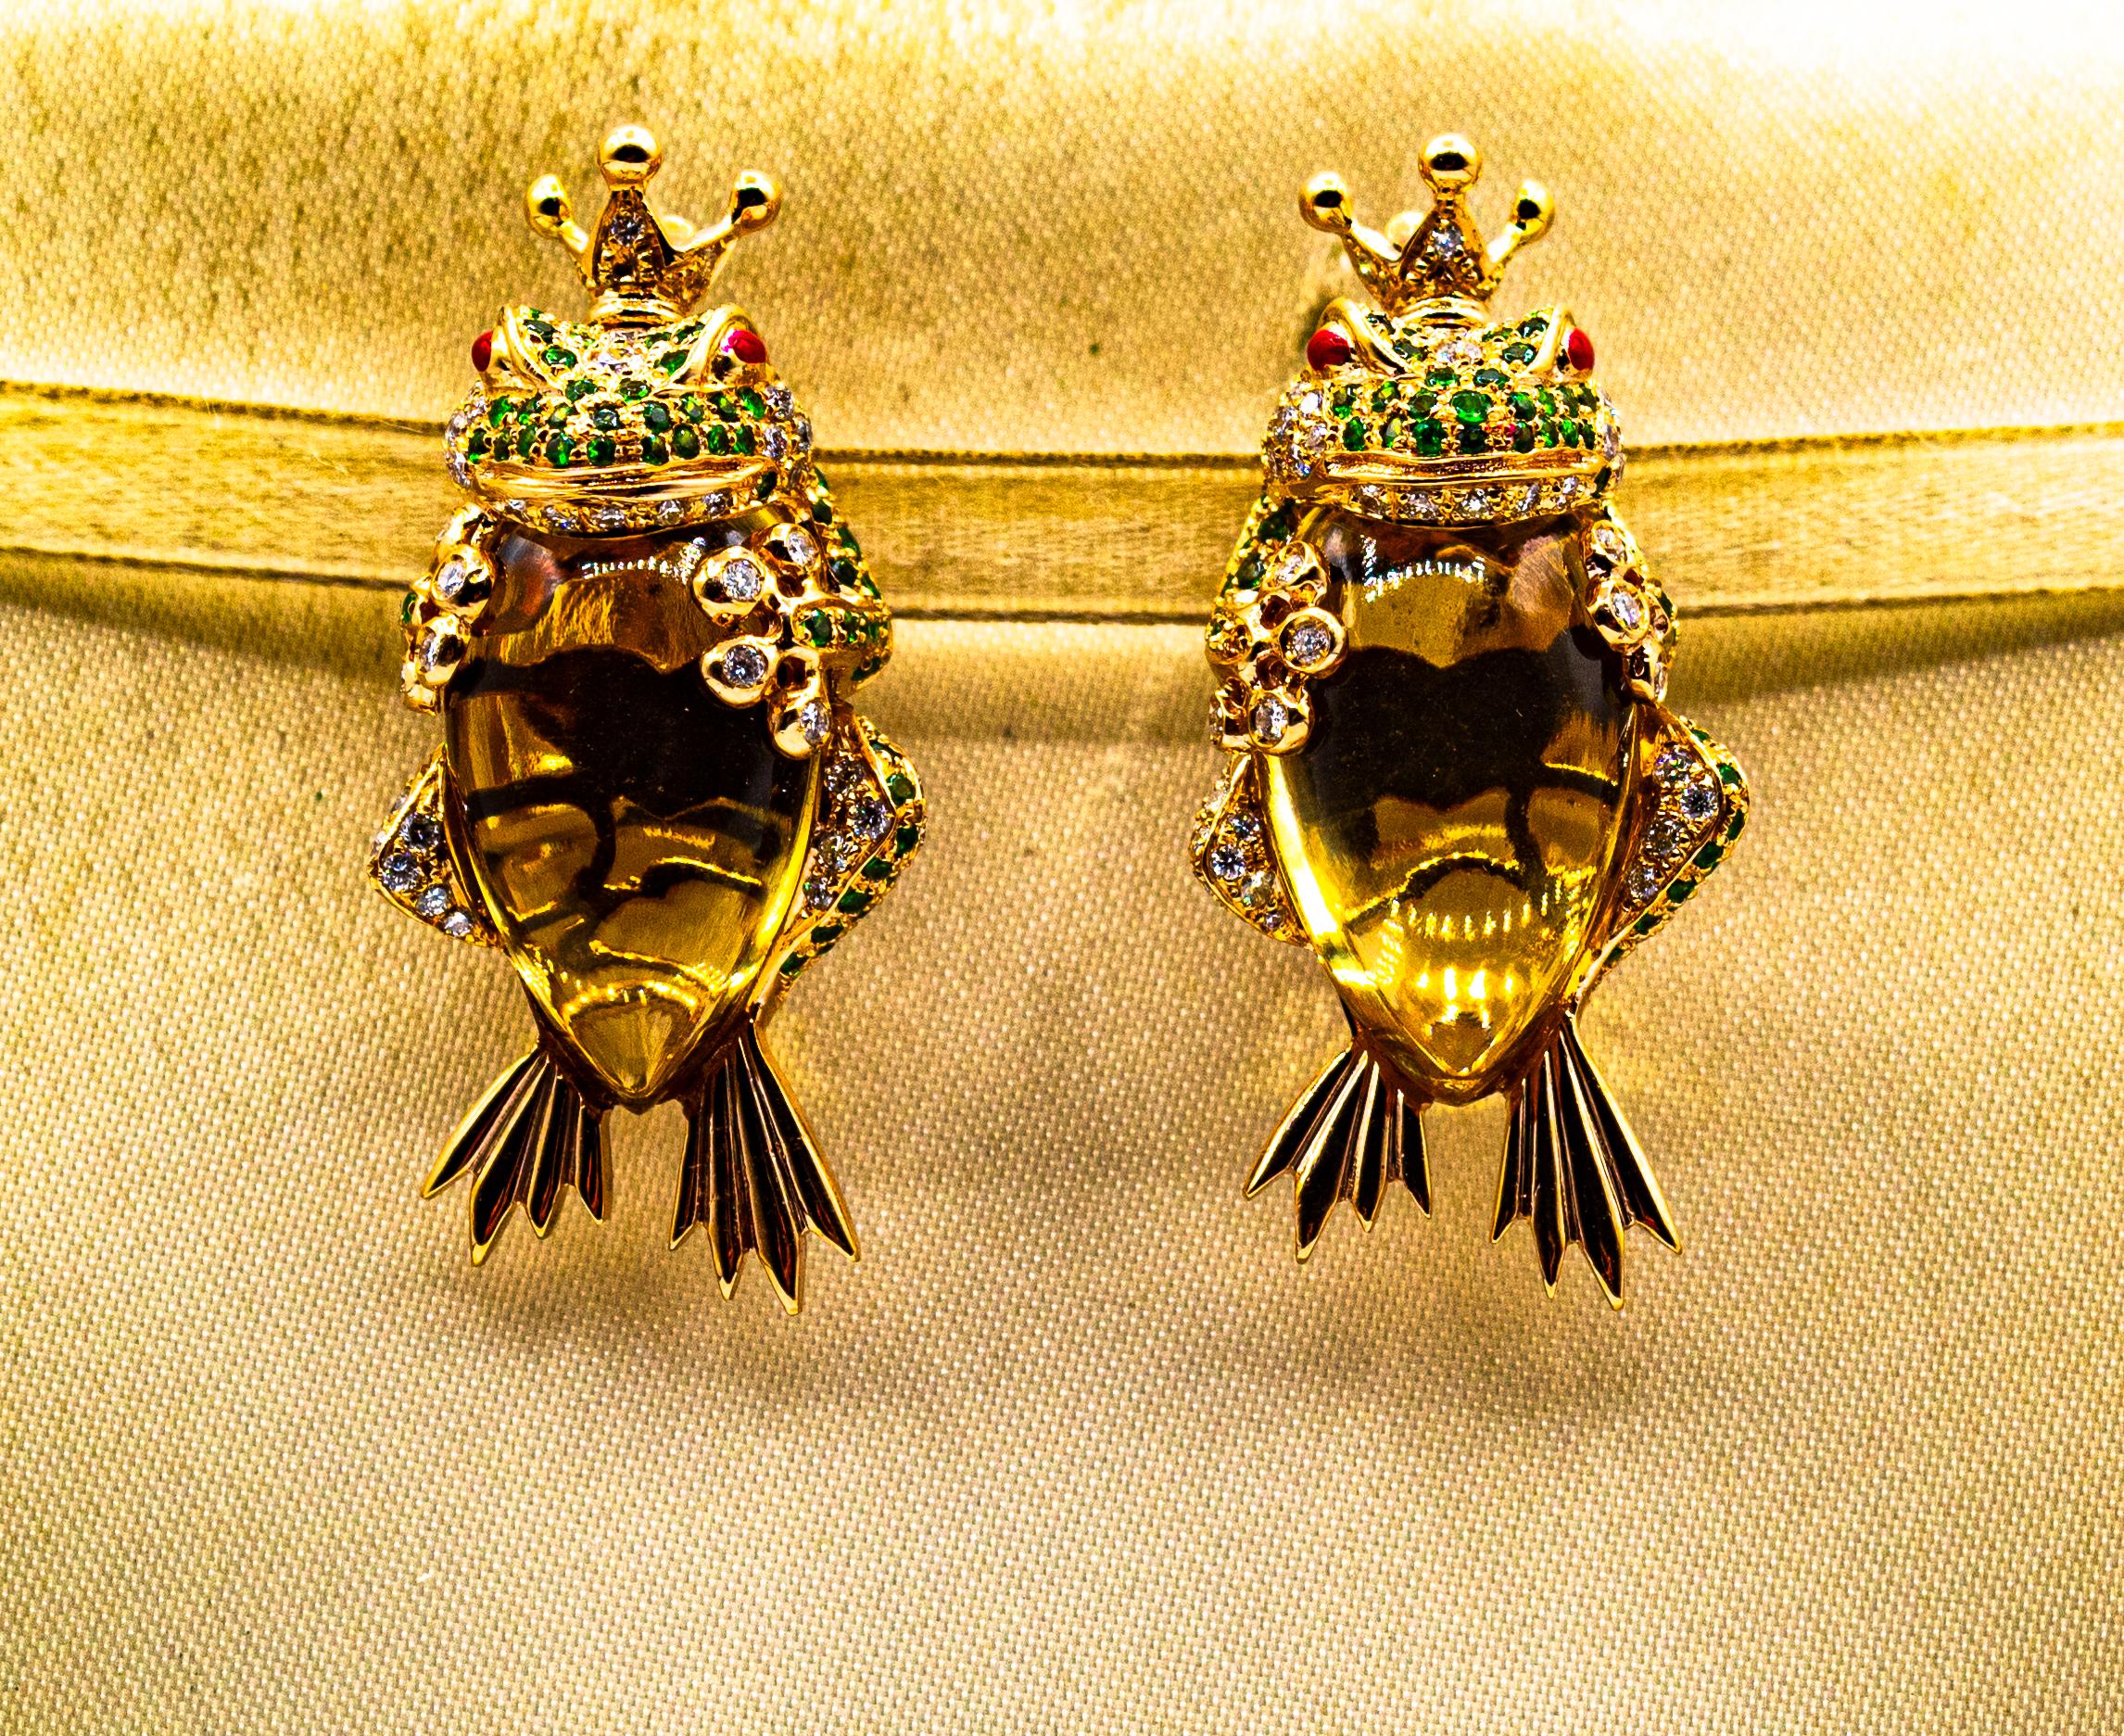 These Clip-On Earrings are made of 14K Yellow Gold.
These Earrings have 1.60 Carats of White Brilliant Cut Diamonds.
These Earrings have 2.60 Carats of Tsavorite.
These Earrings have 25.00 Carats of Citrine.

These Earrings have also their matching